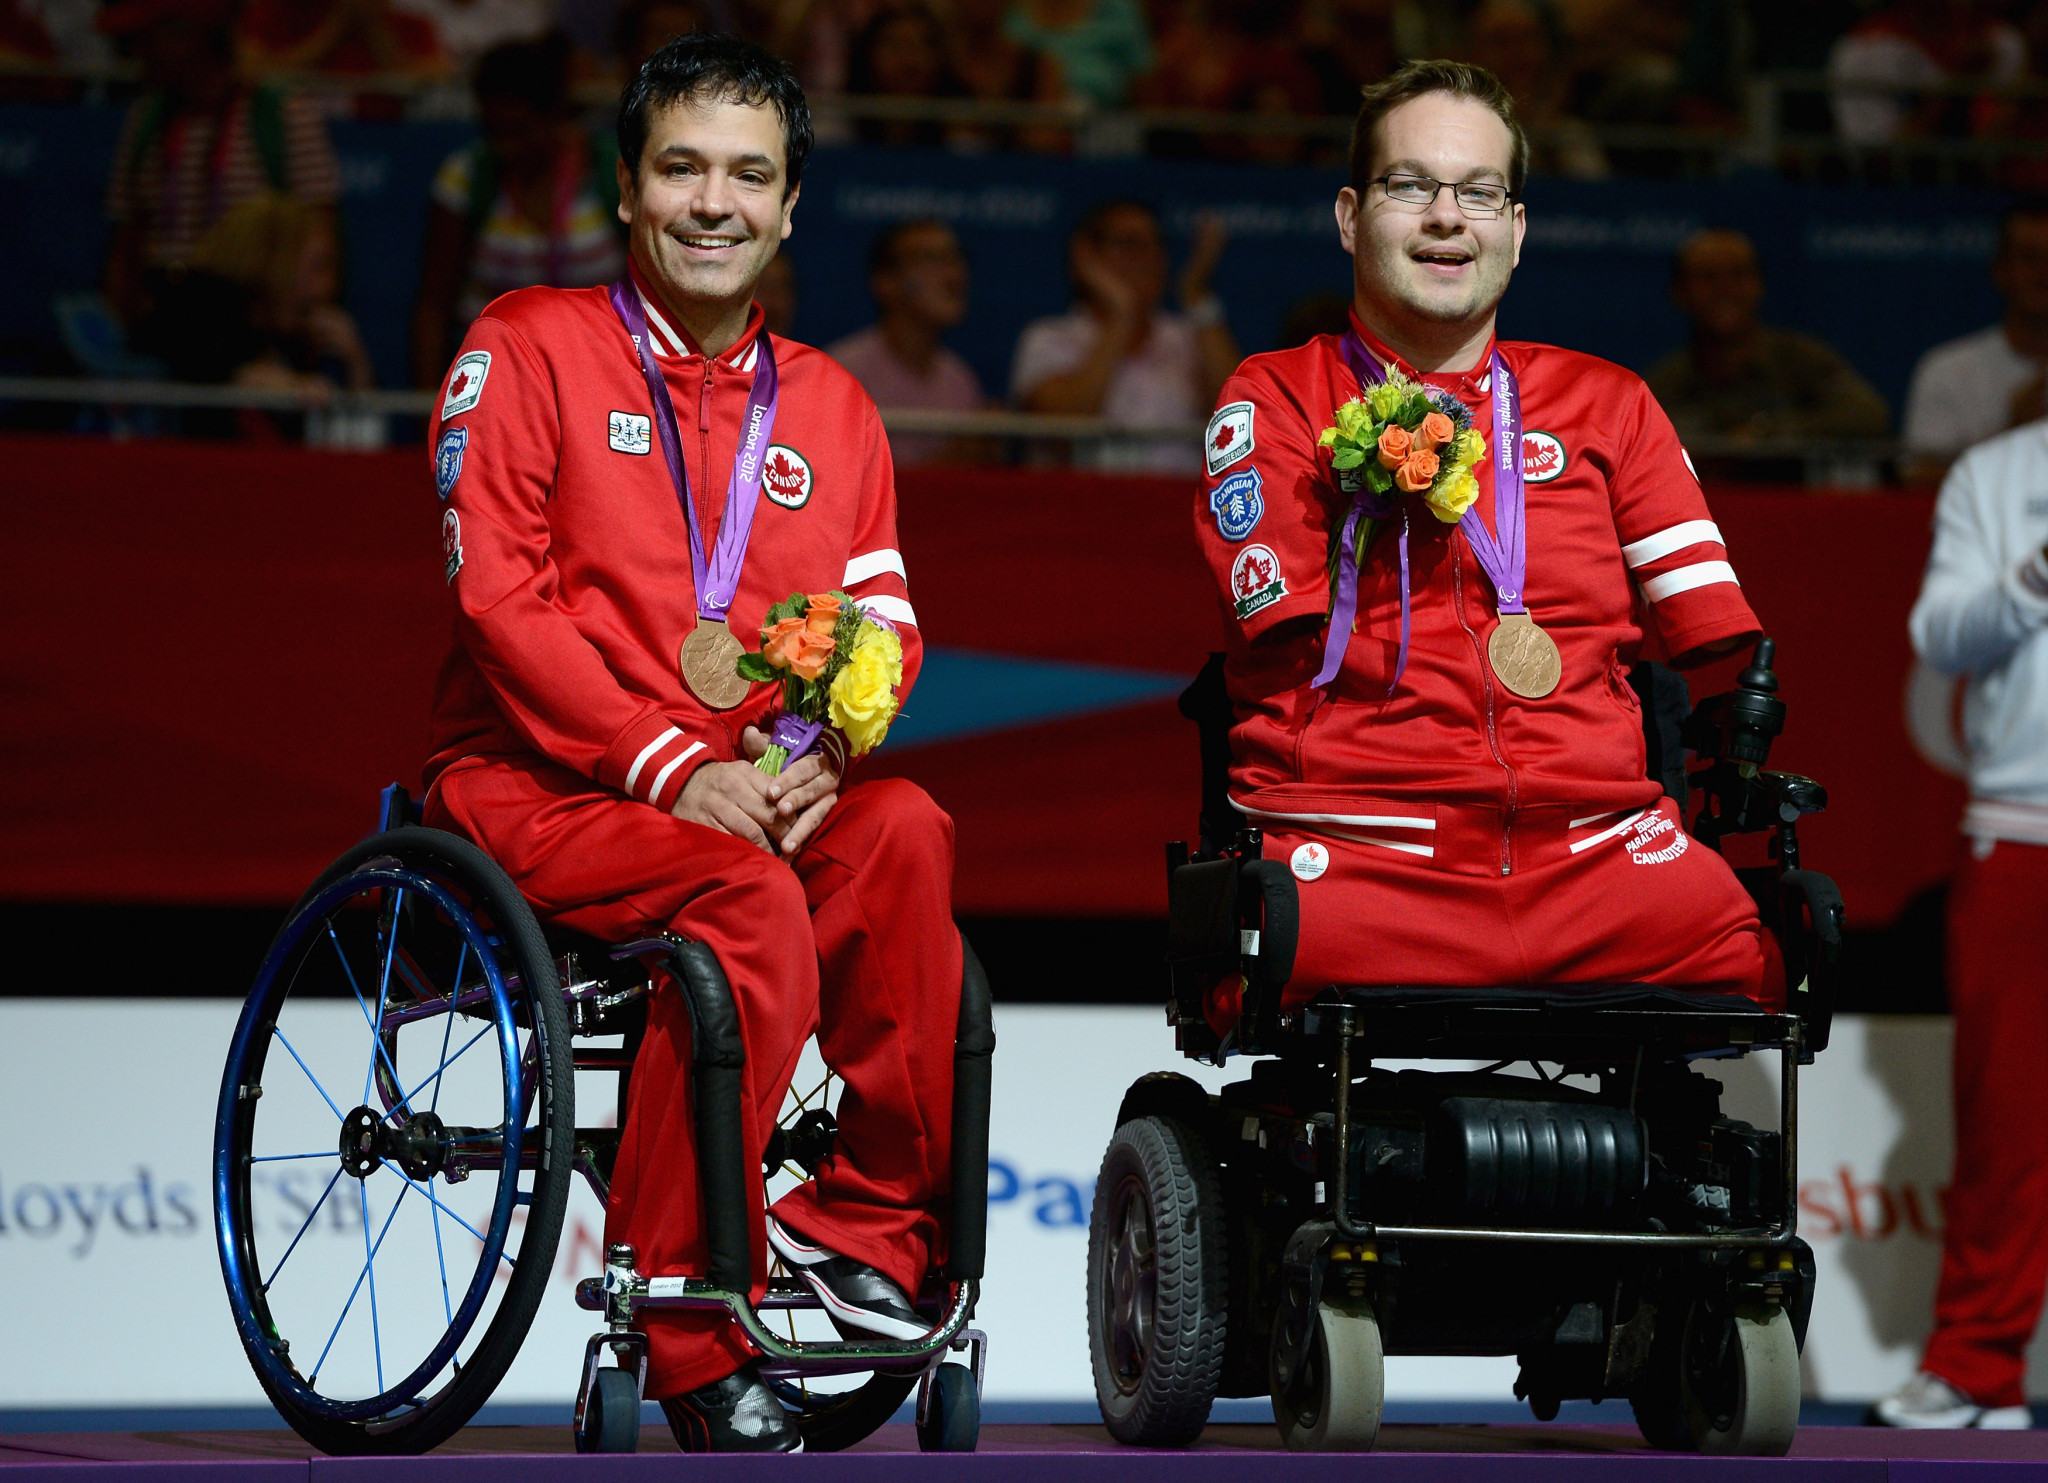 Josh Vander Vies finished with a boccia bronze medal at London 2012 ©Getty Images